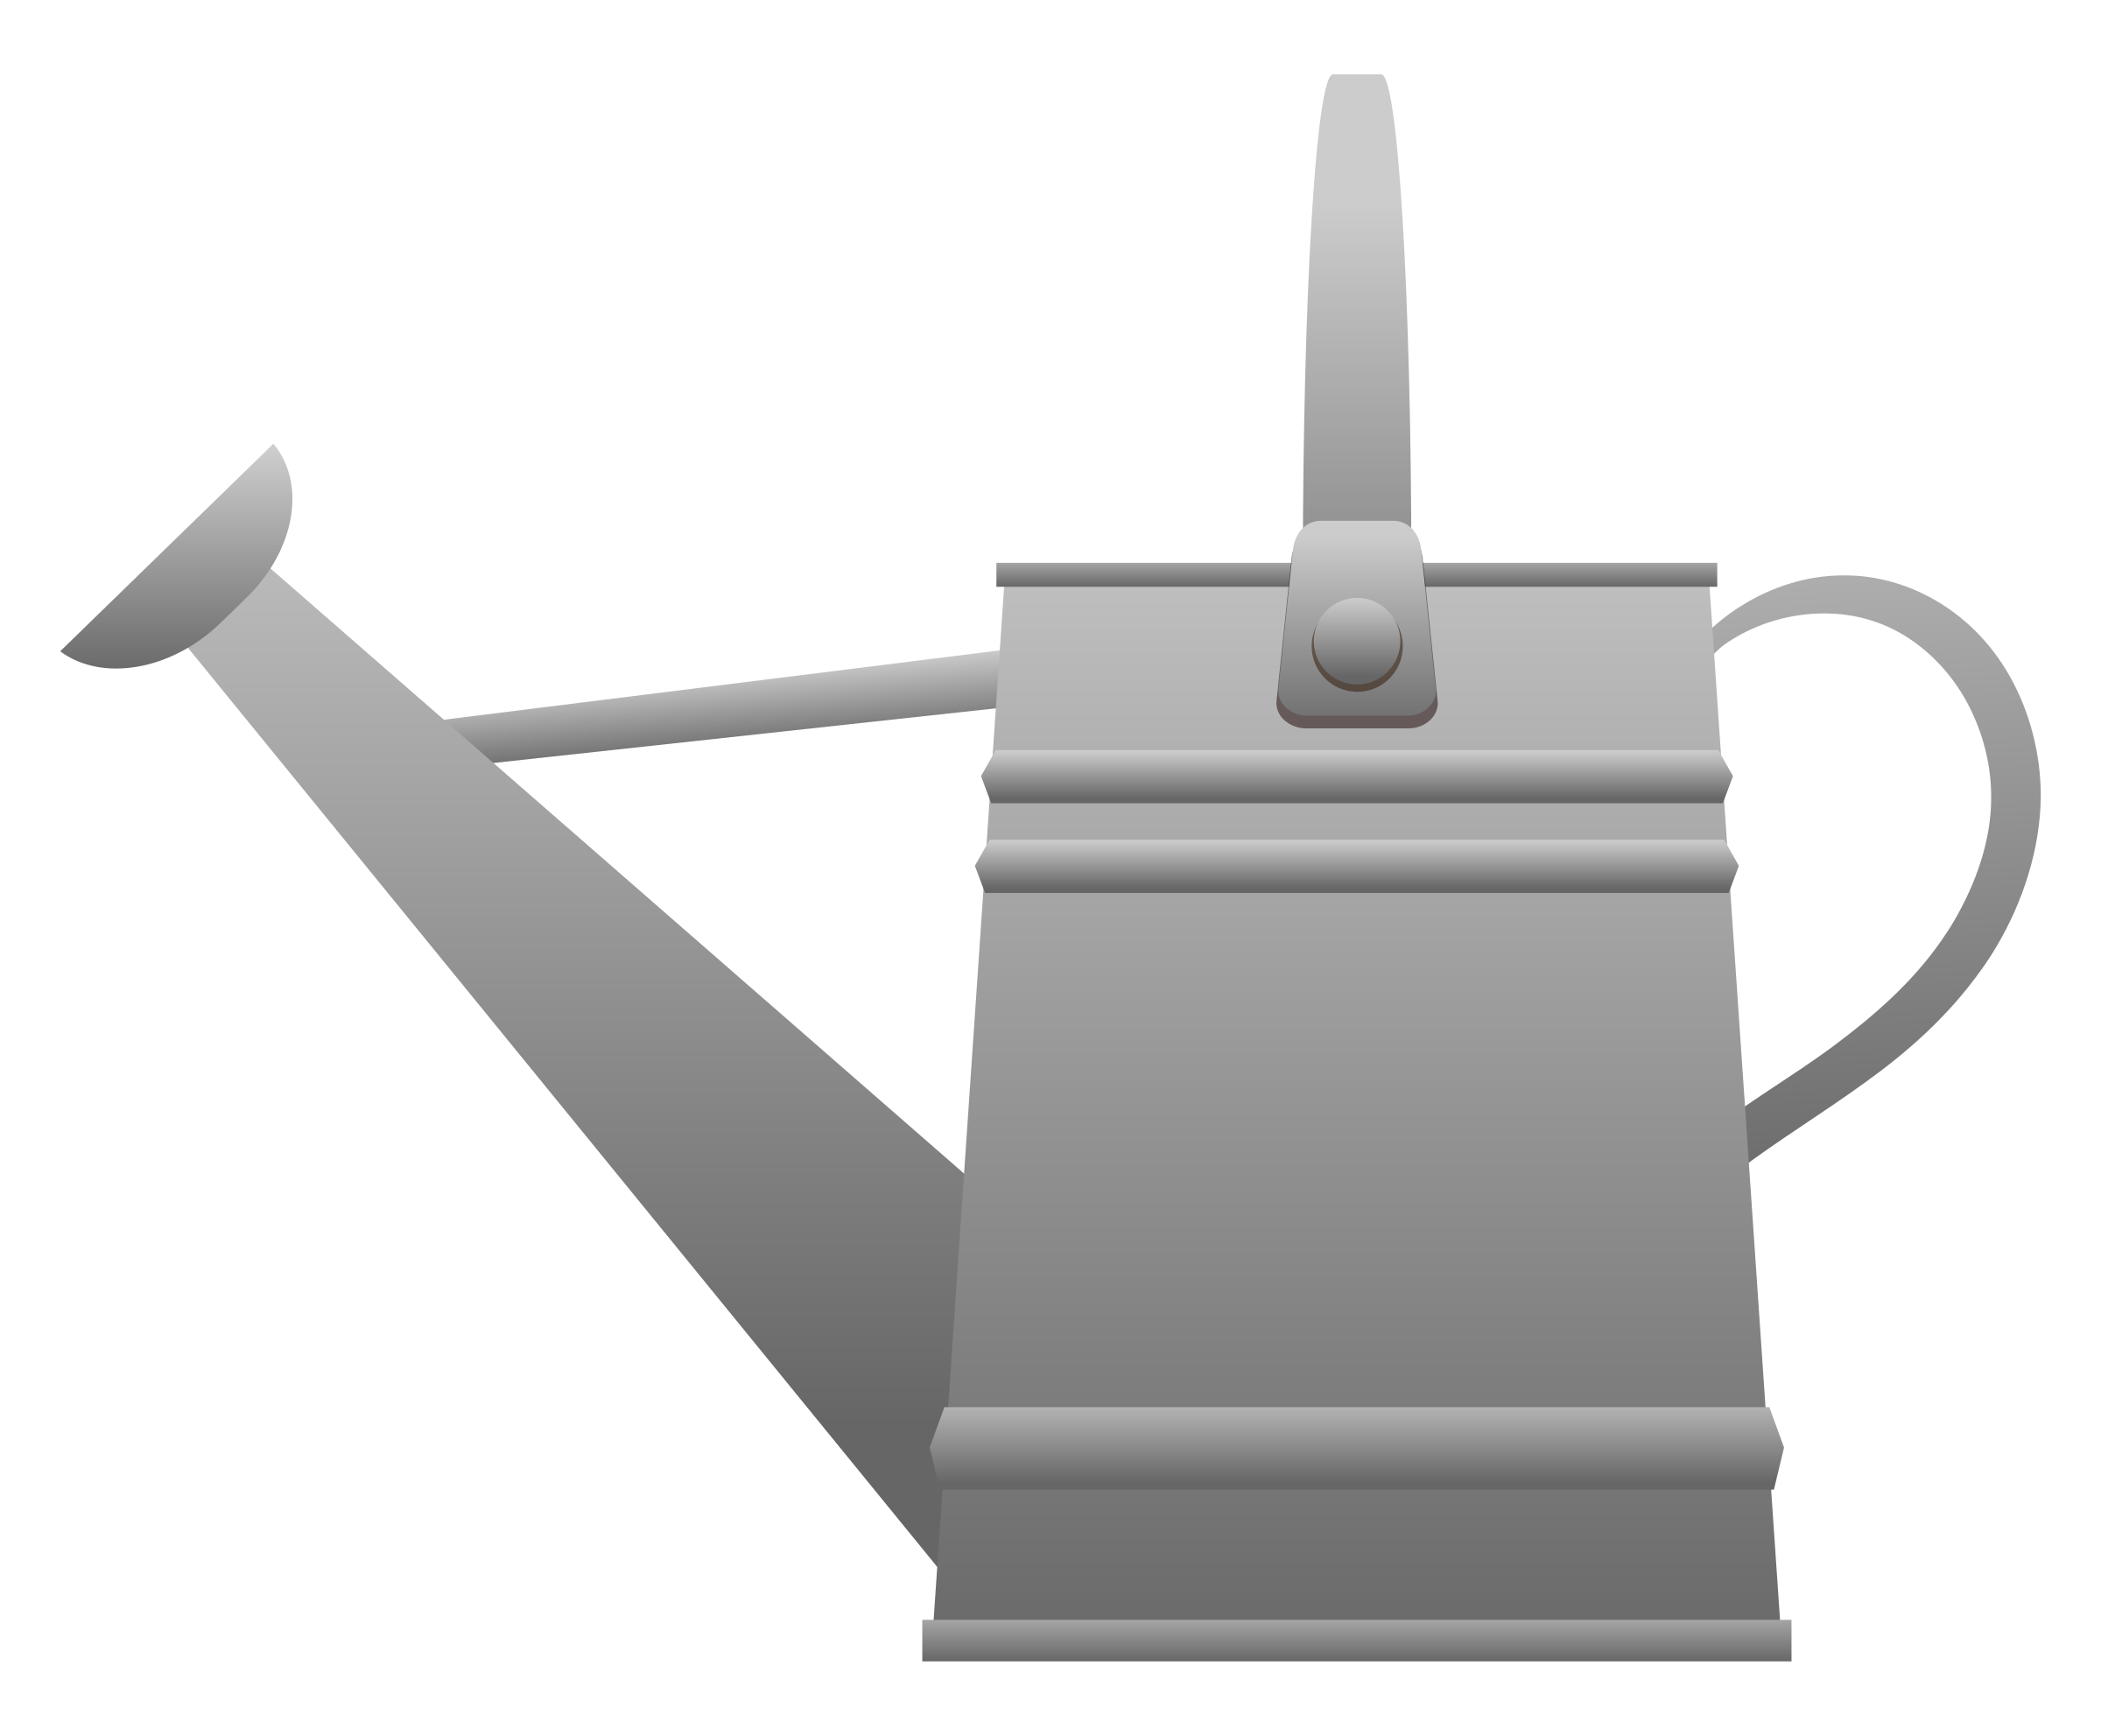 Clipart watering can